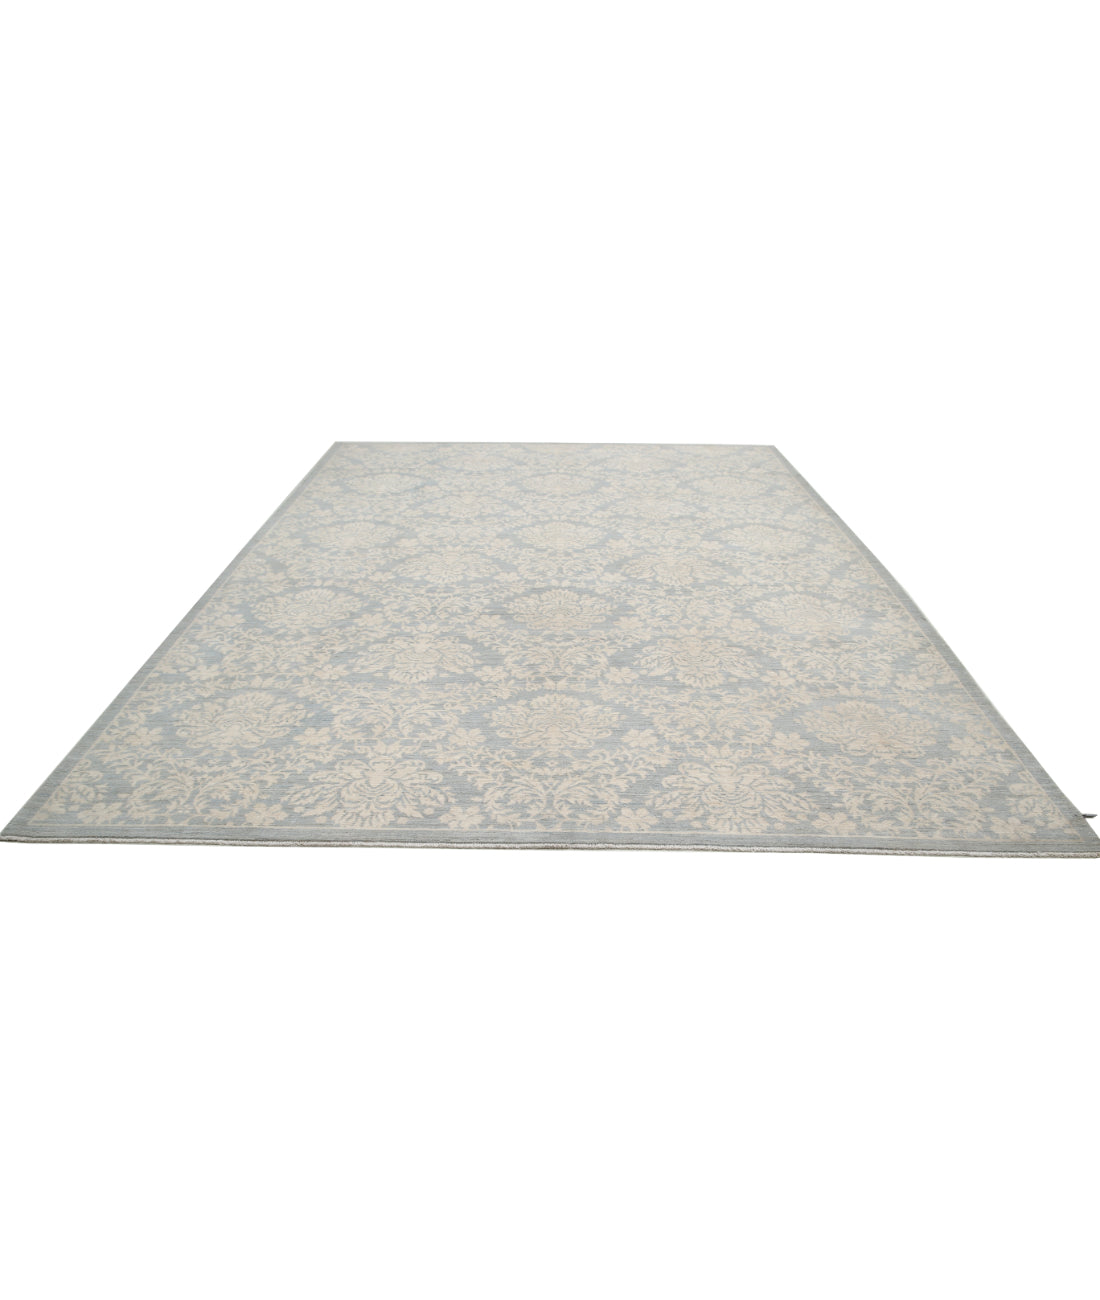 Hand Knotted Artemix Wool Rug - 10'2'' x 13'2'' 10'2'' x 13'2'' (305 X 395) / Grey / Ivory